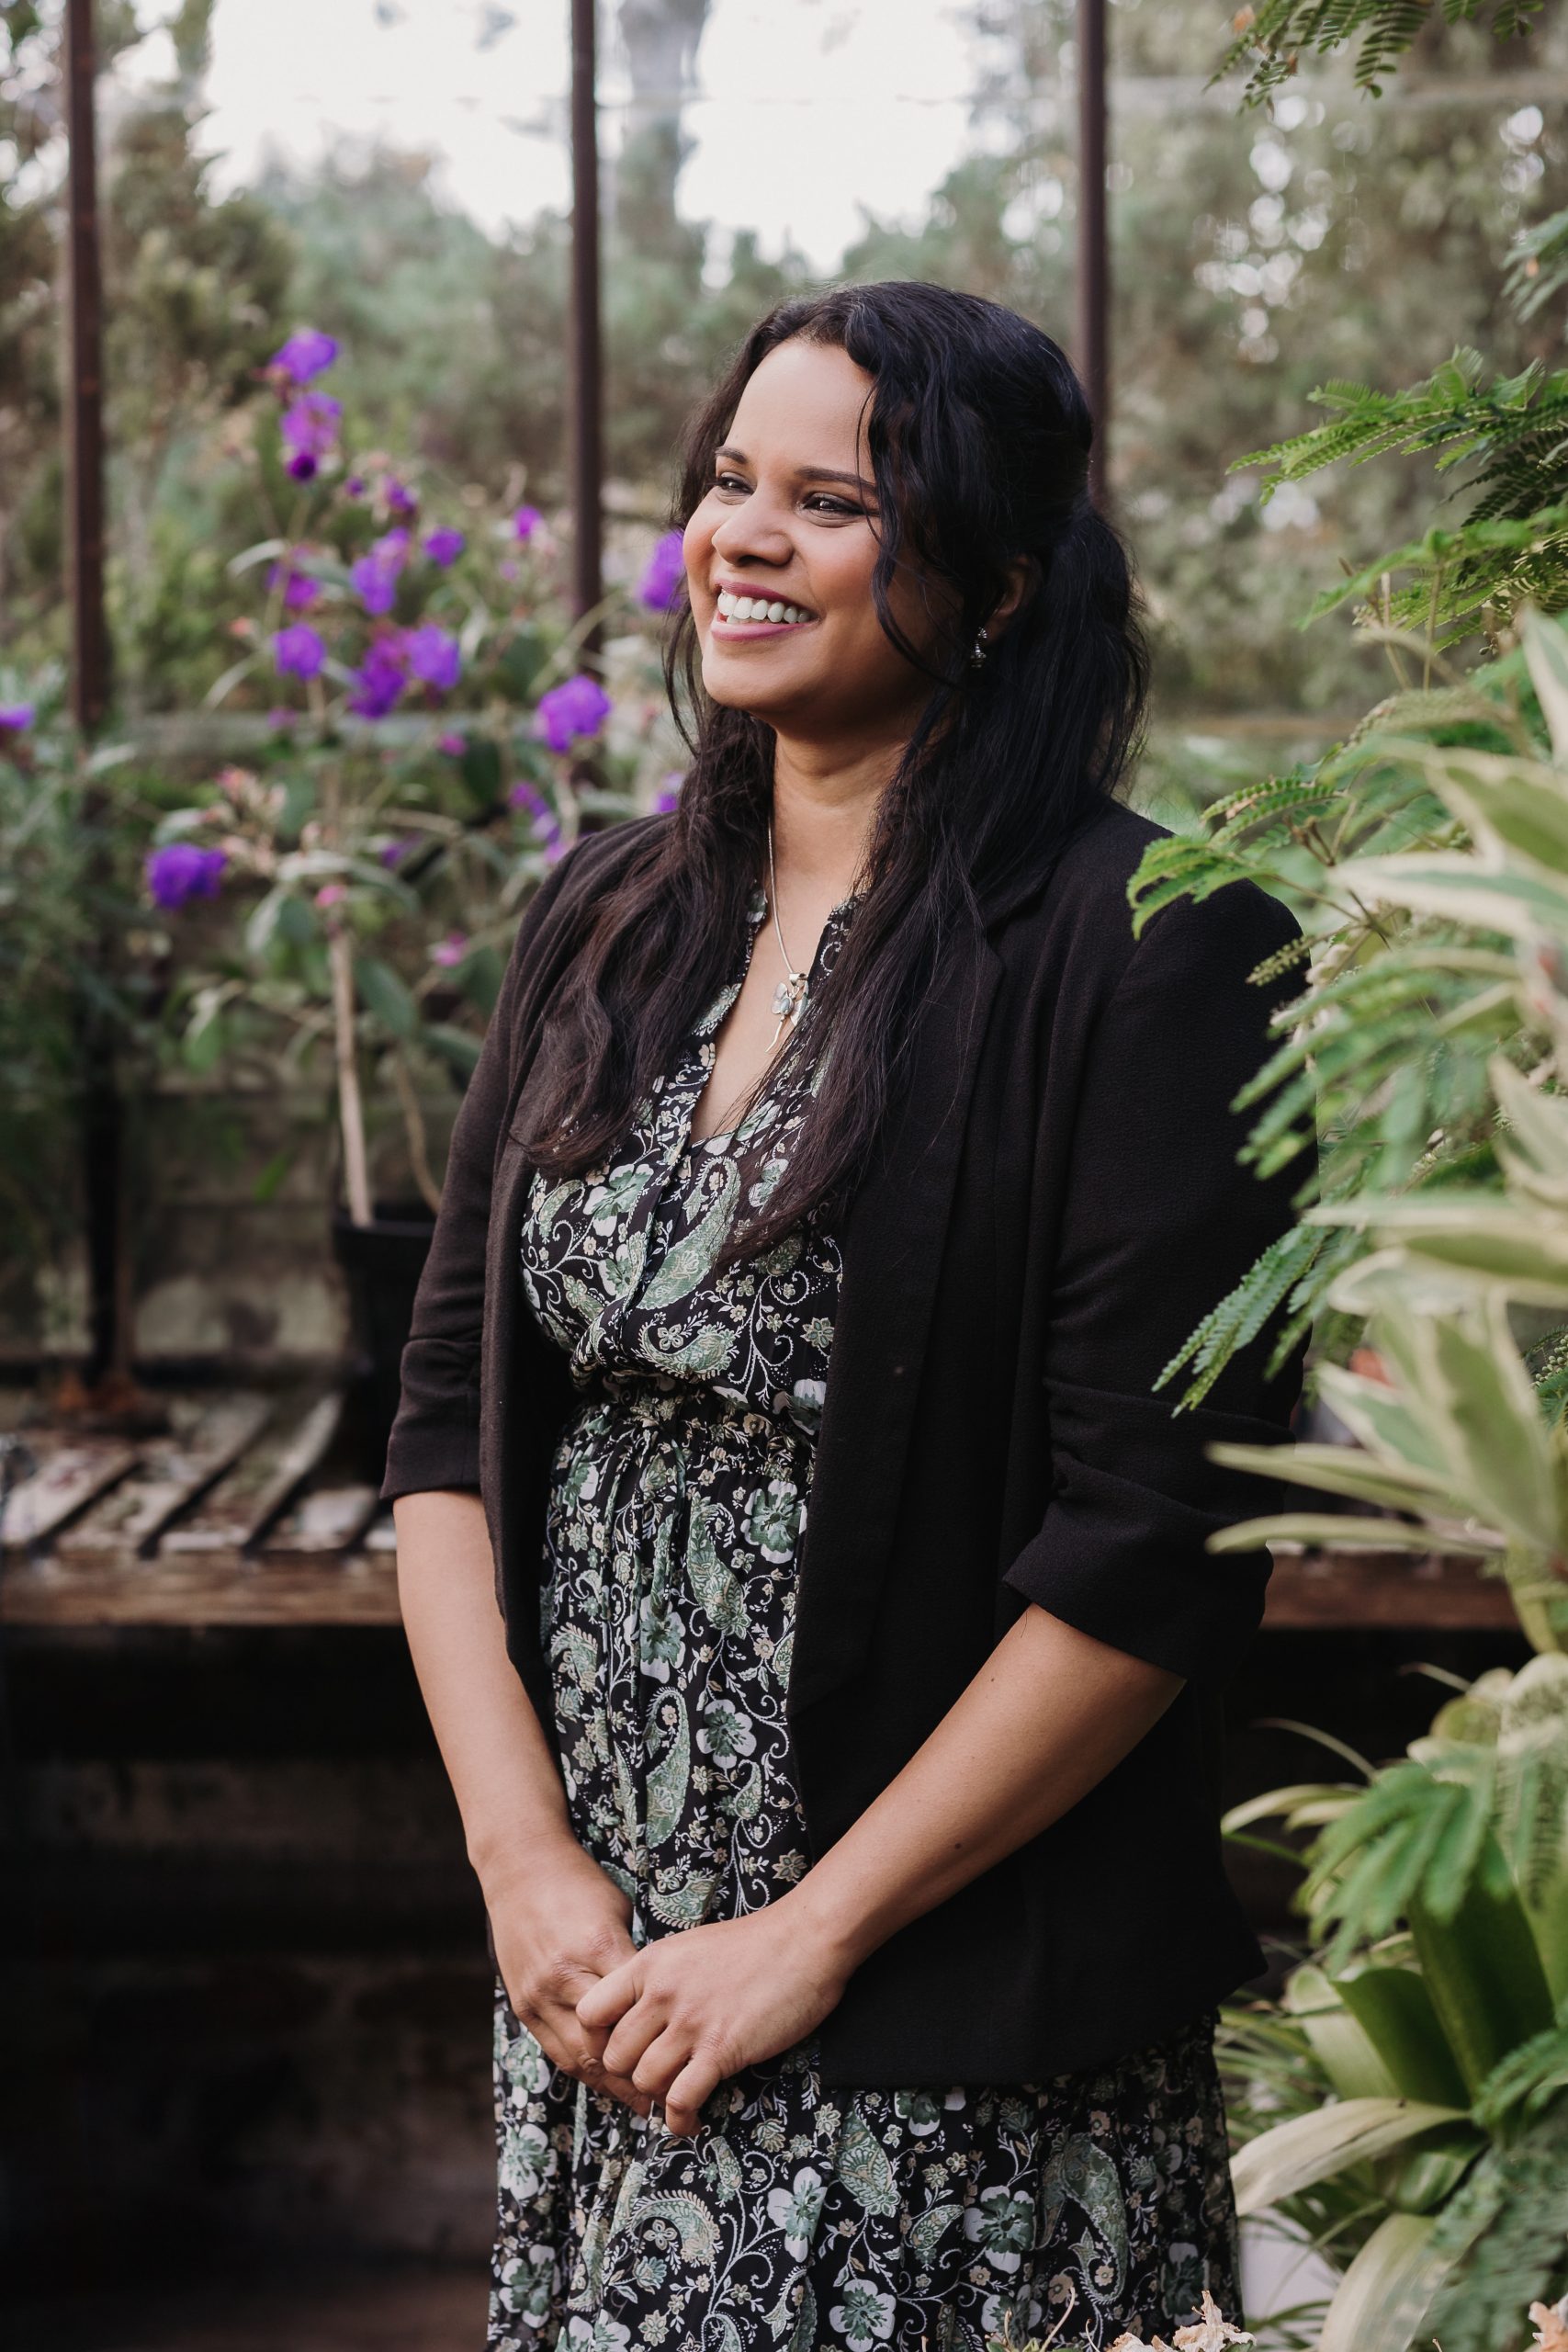 Dr Shobhana Nagraj stood in greenhouse looking off camera surrounded by greenery and flowers